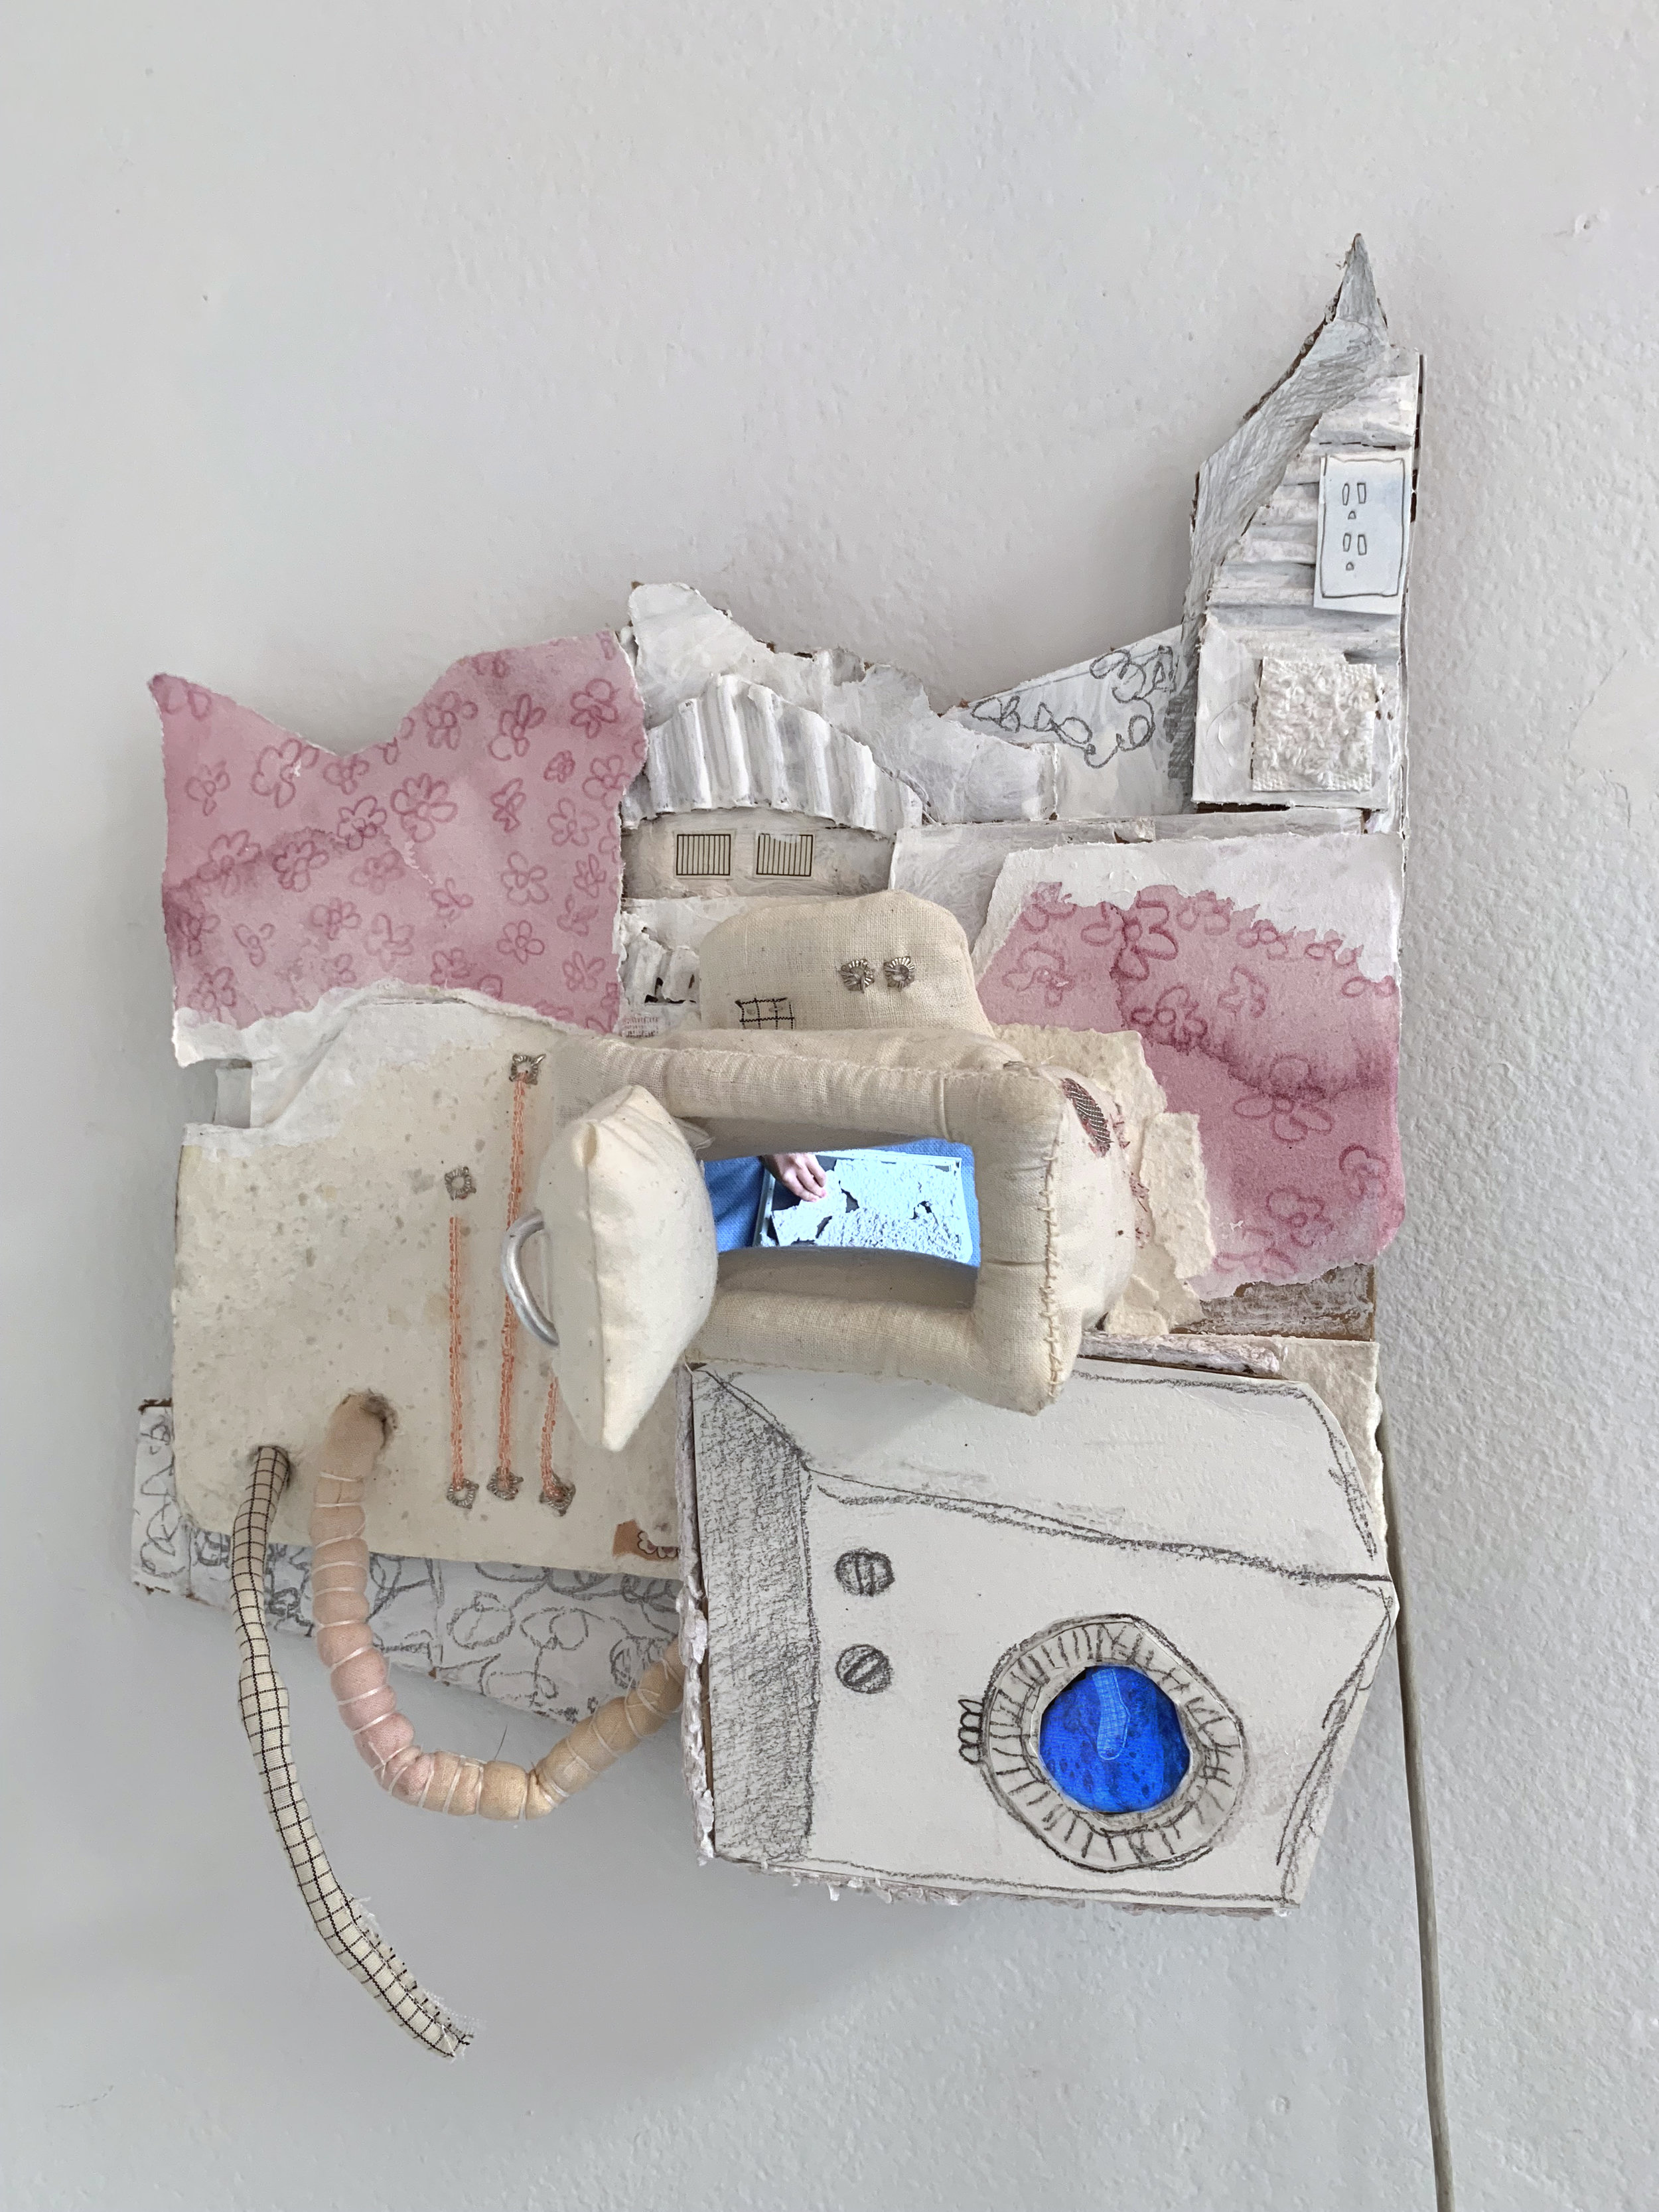   Untitled 3,  cardboard, paper, watercolor, beads, paint, fabric, graphite, video, picture slideshow, 2018  In collaboration with Rachel Wilkins 